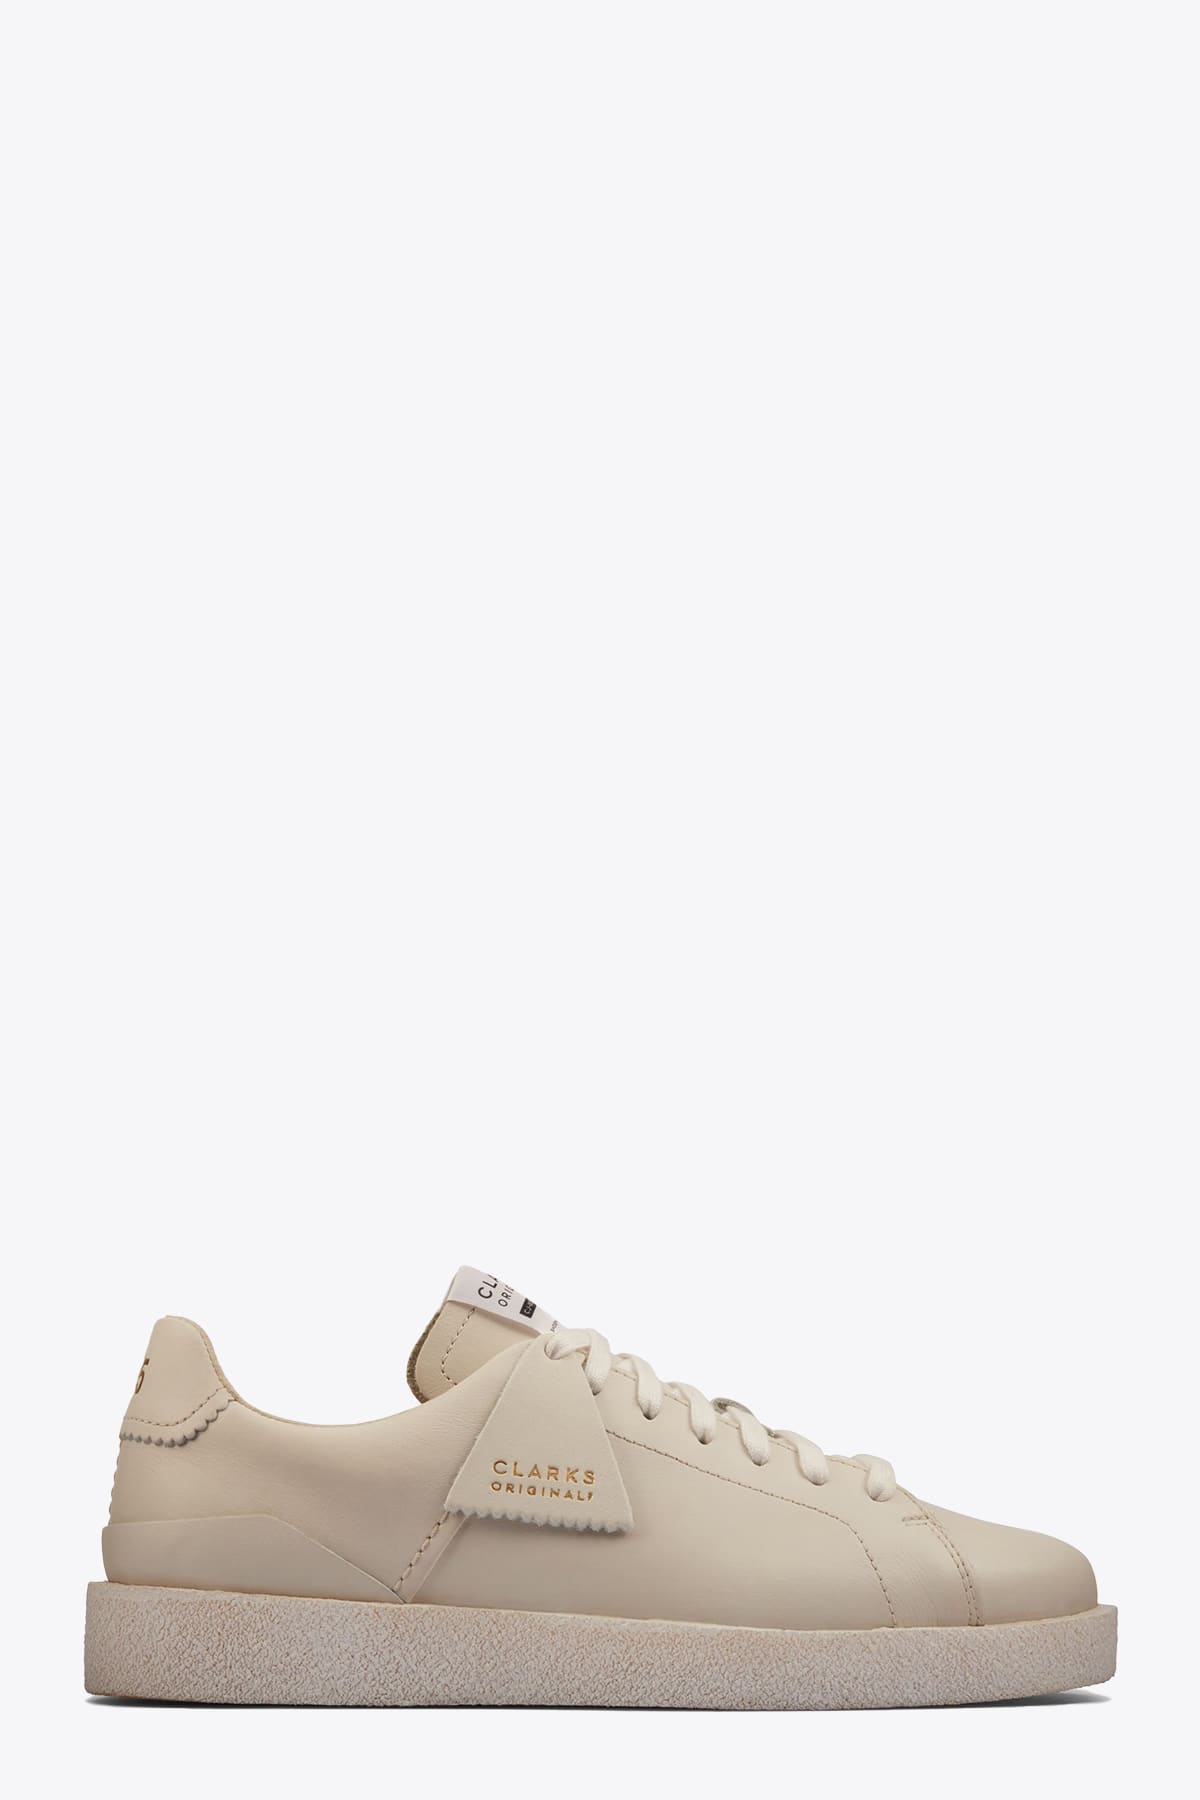 Clarks Tormatch Sneaker Off-white leather low top lace-up sneaker - Tormatch